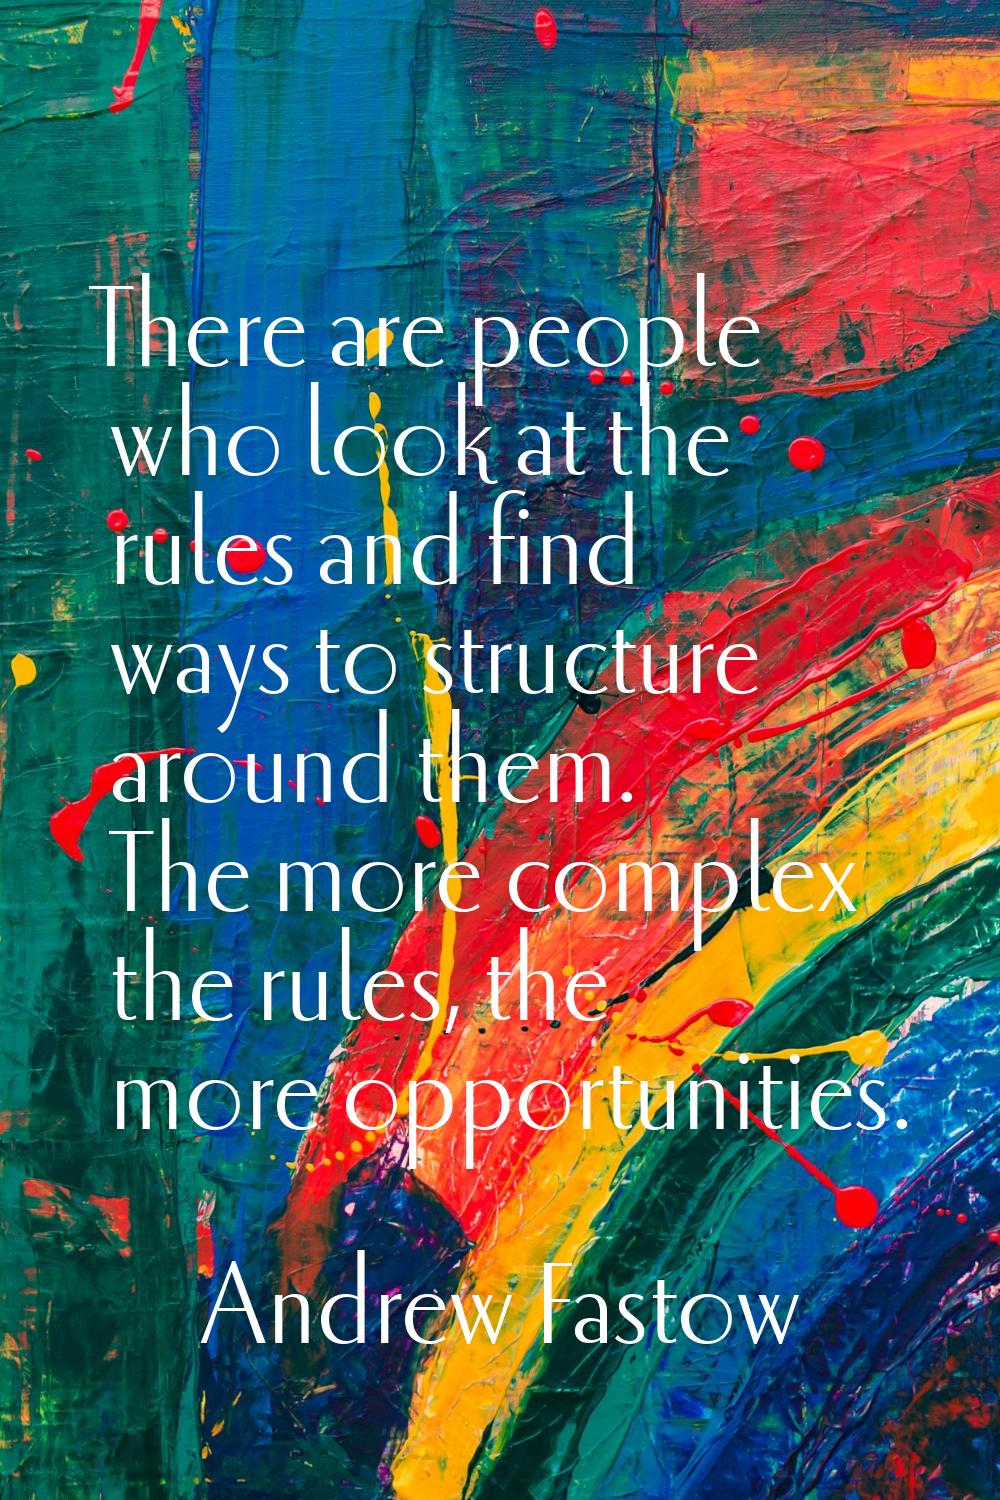 There are people who look at the rules and find ways to structure around them. The more complex the